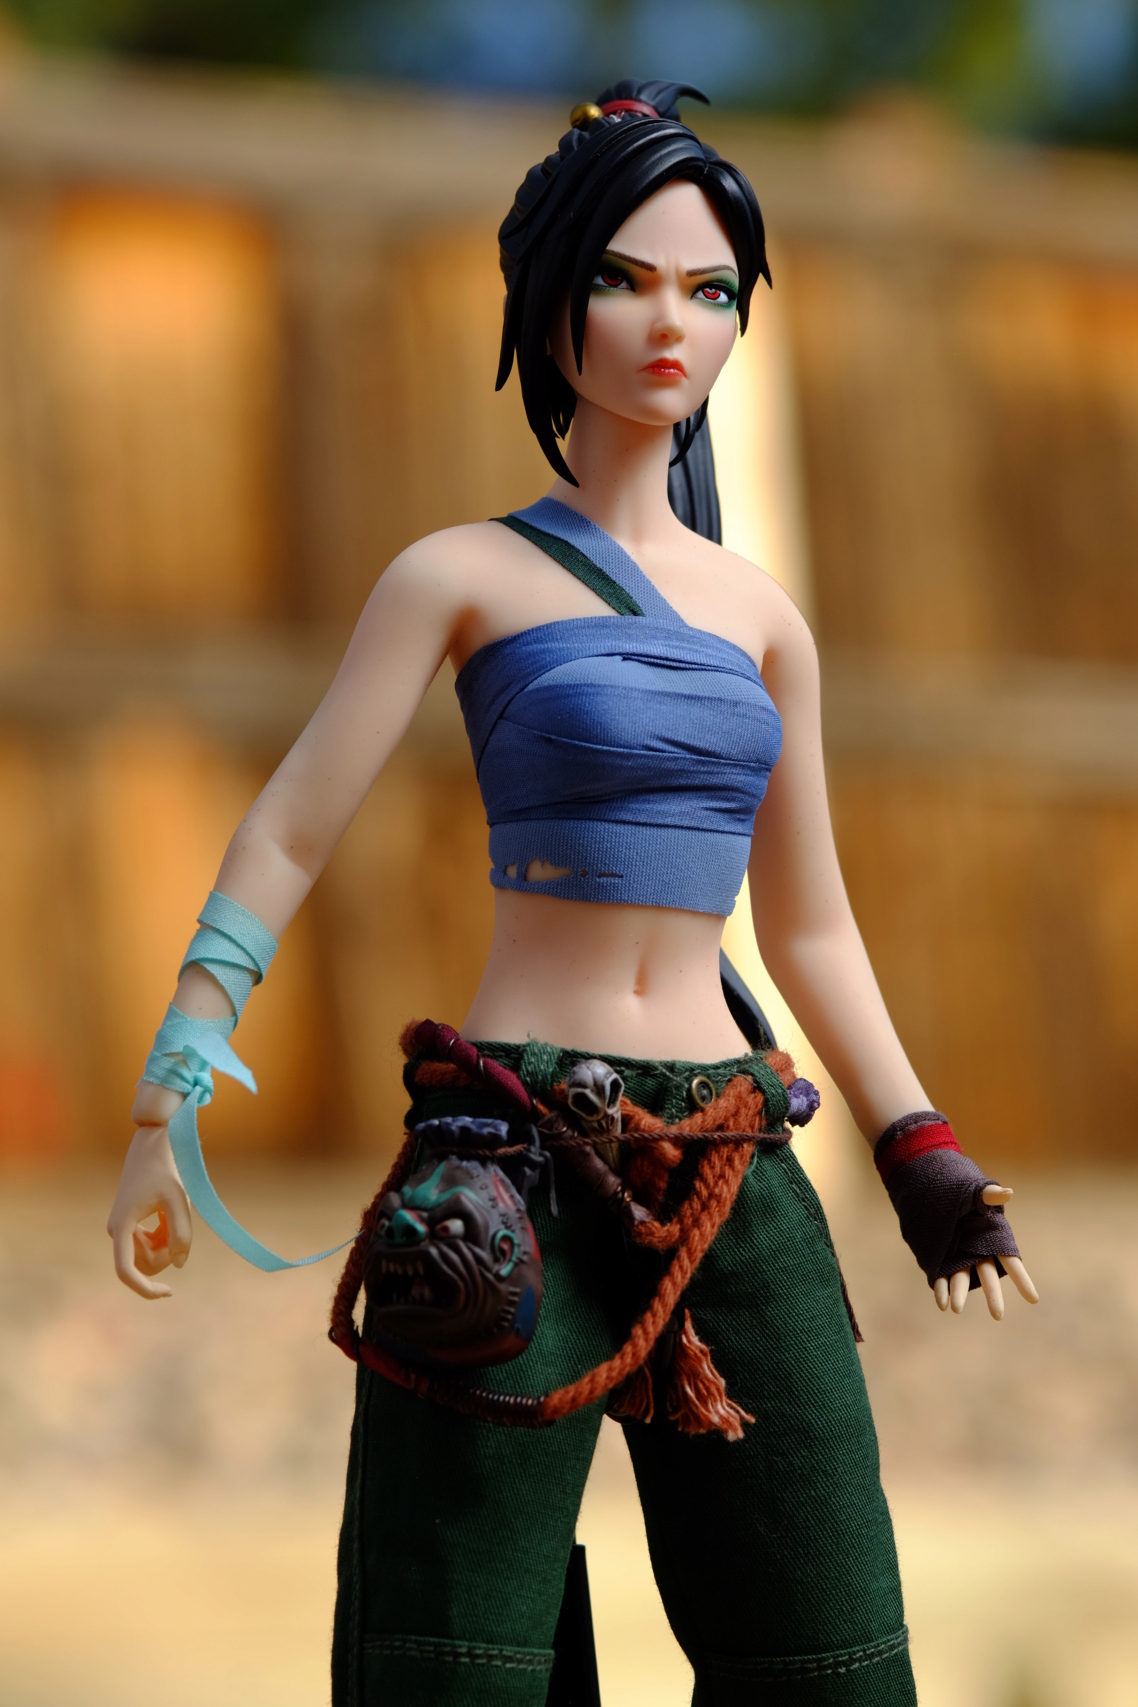 Female - NEW PRODUCT: TBLeague: 1/6 scale Xiaoqing Verta International Edition Figure (Green & White Versions) Dscf0012